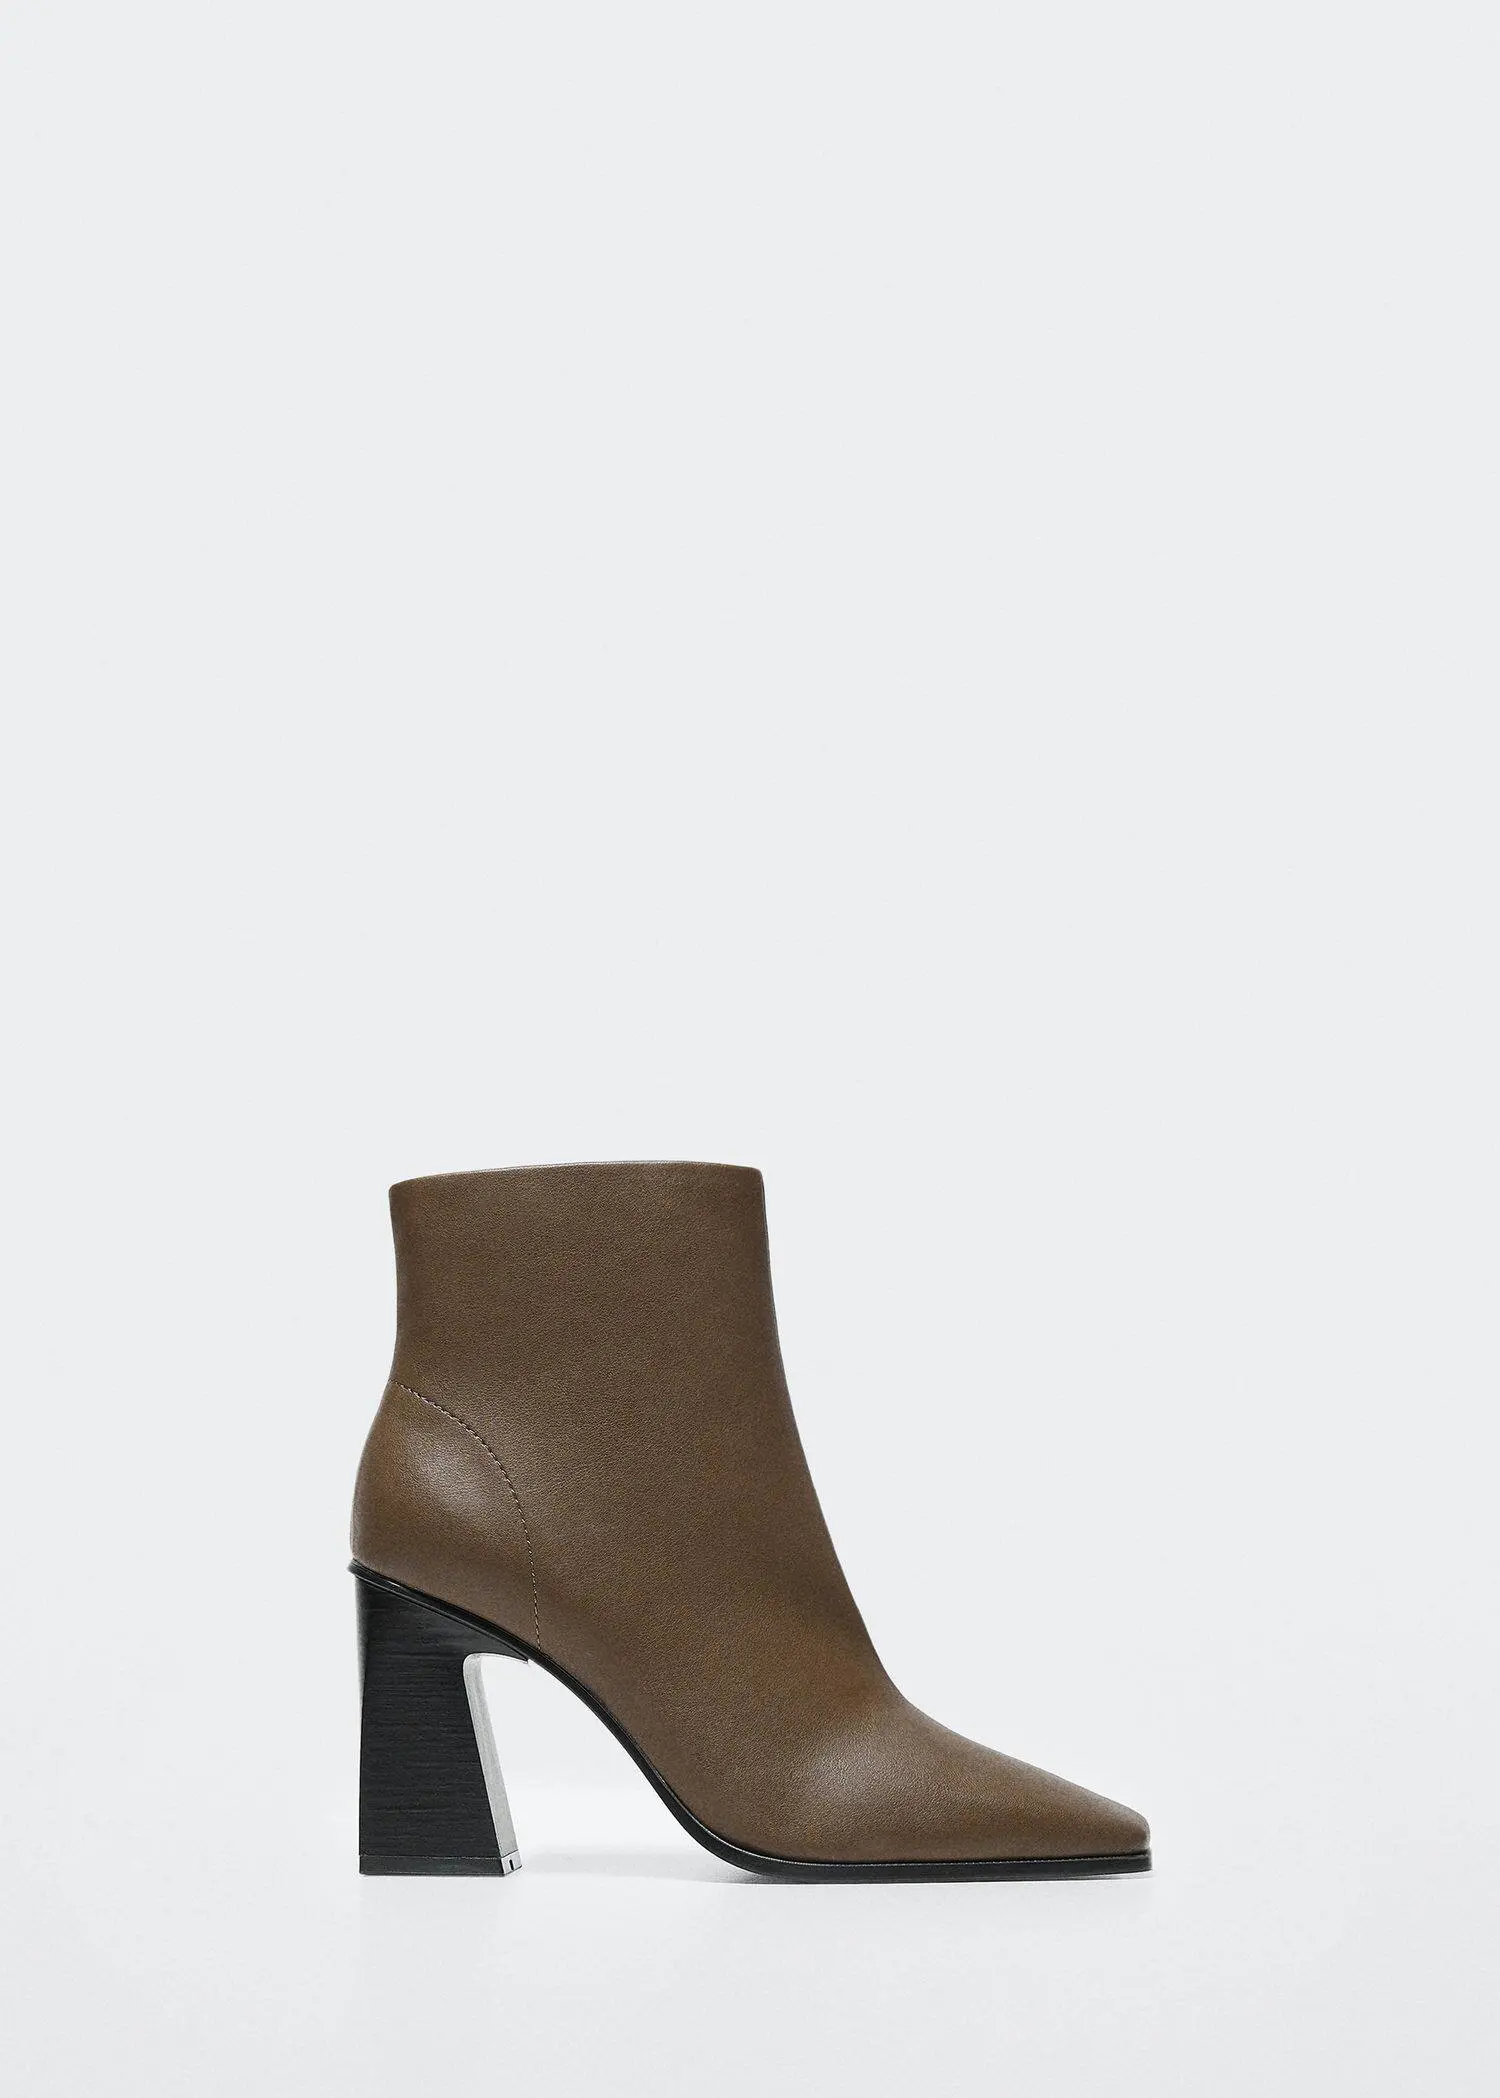 Mango Squared-toe ankle boots. a pair of brown boots with a black and white heel. 